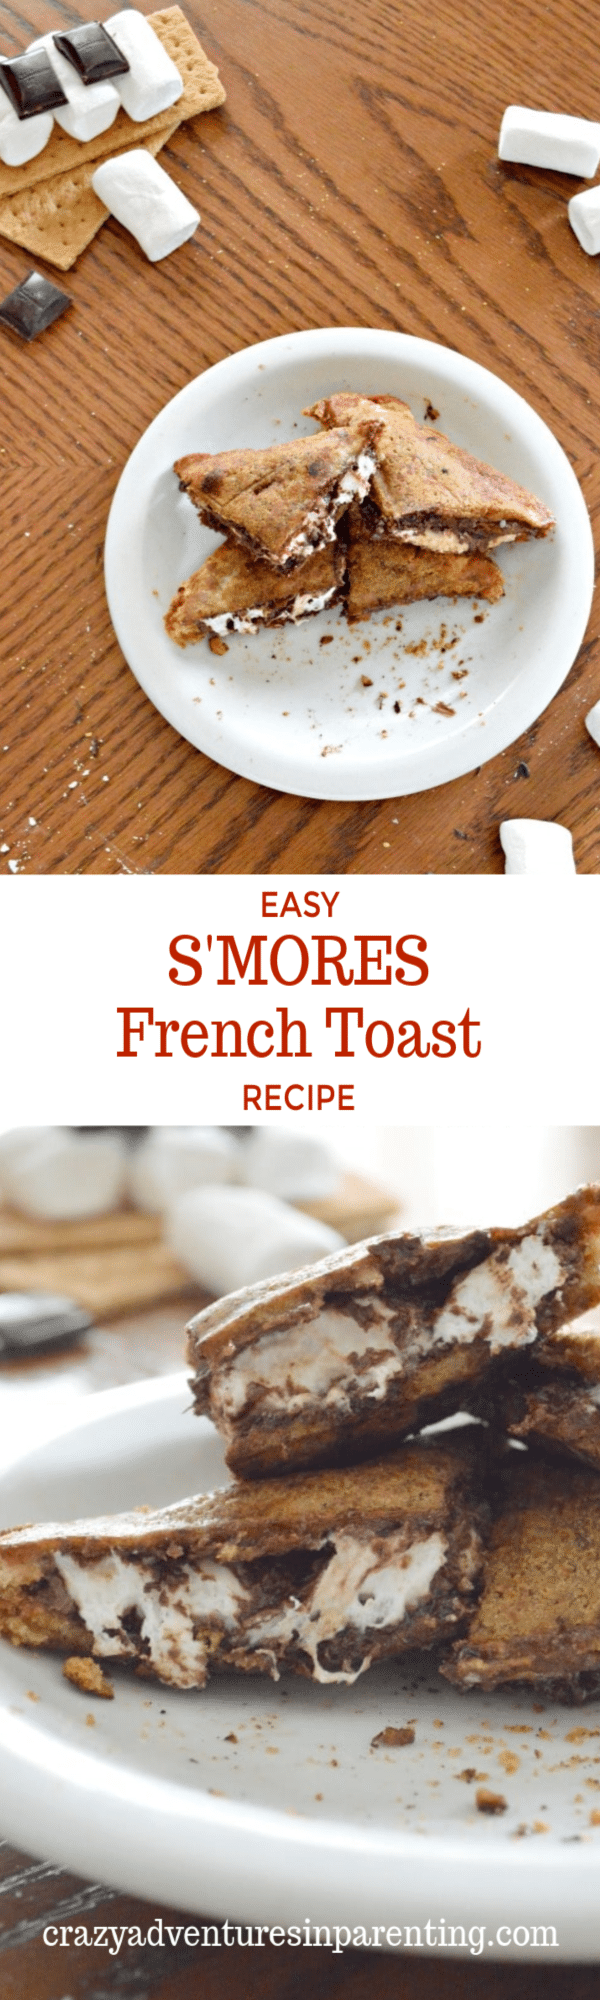 Easy S'mores French Toast Recipe